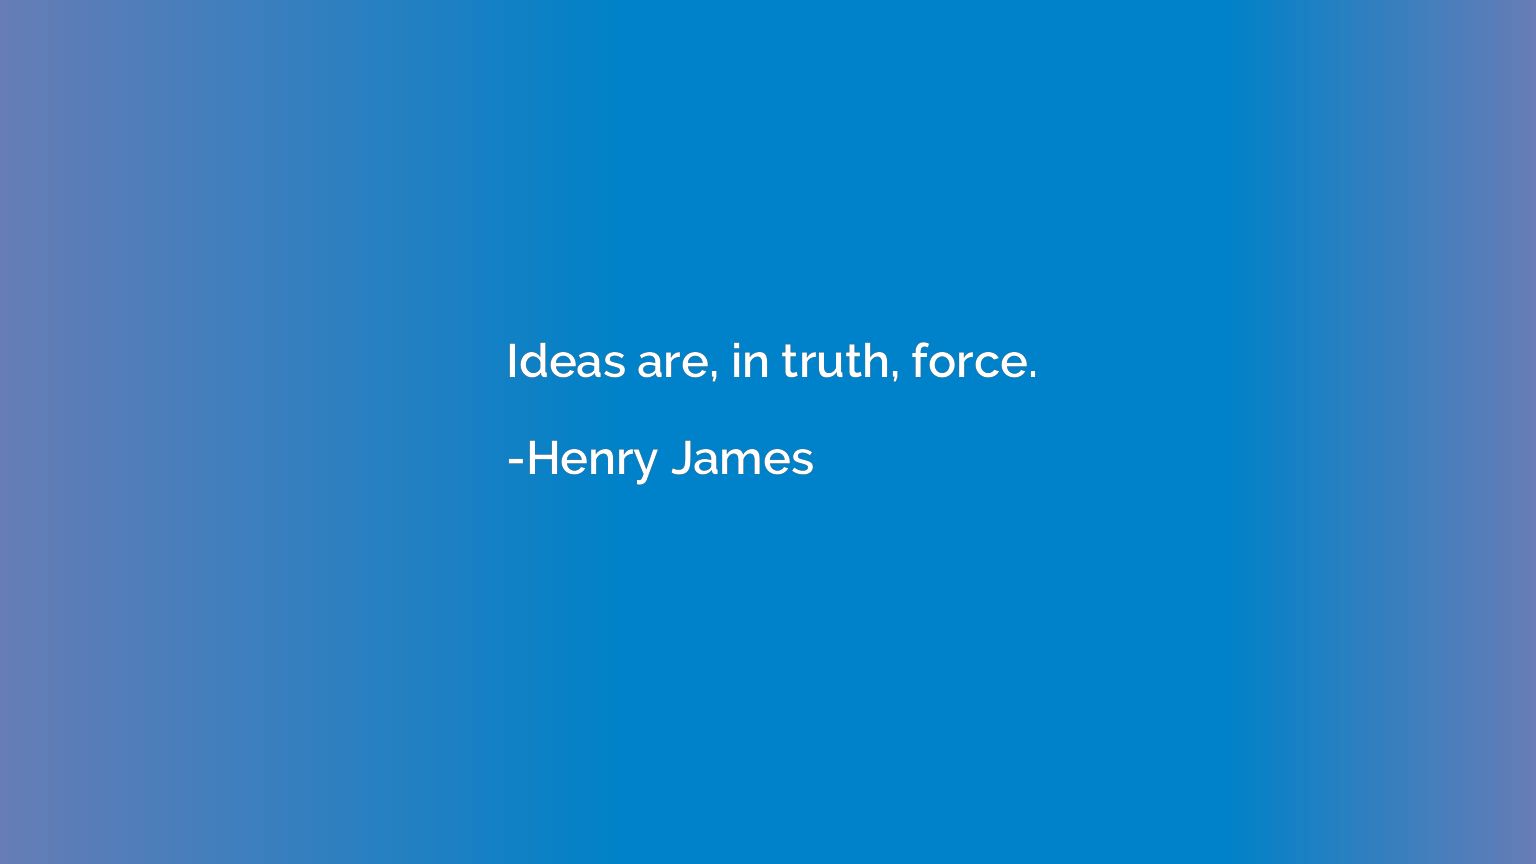 Ideas are, in truth, force.